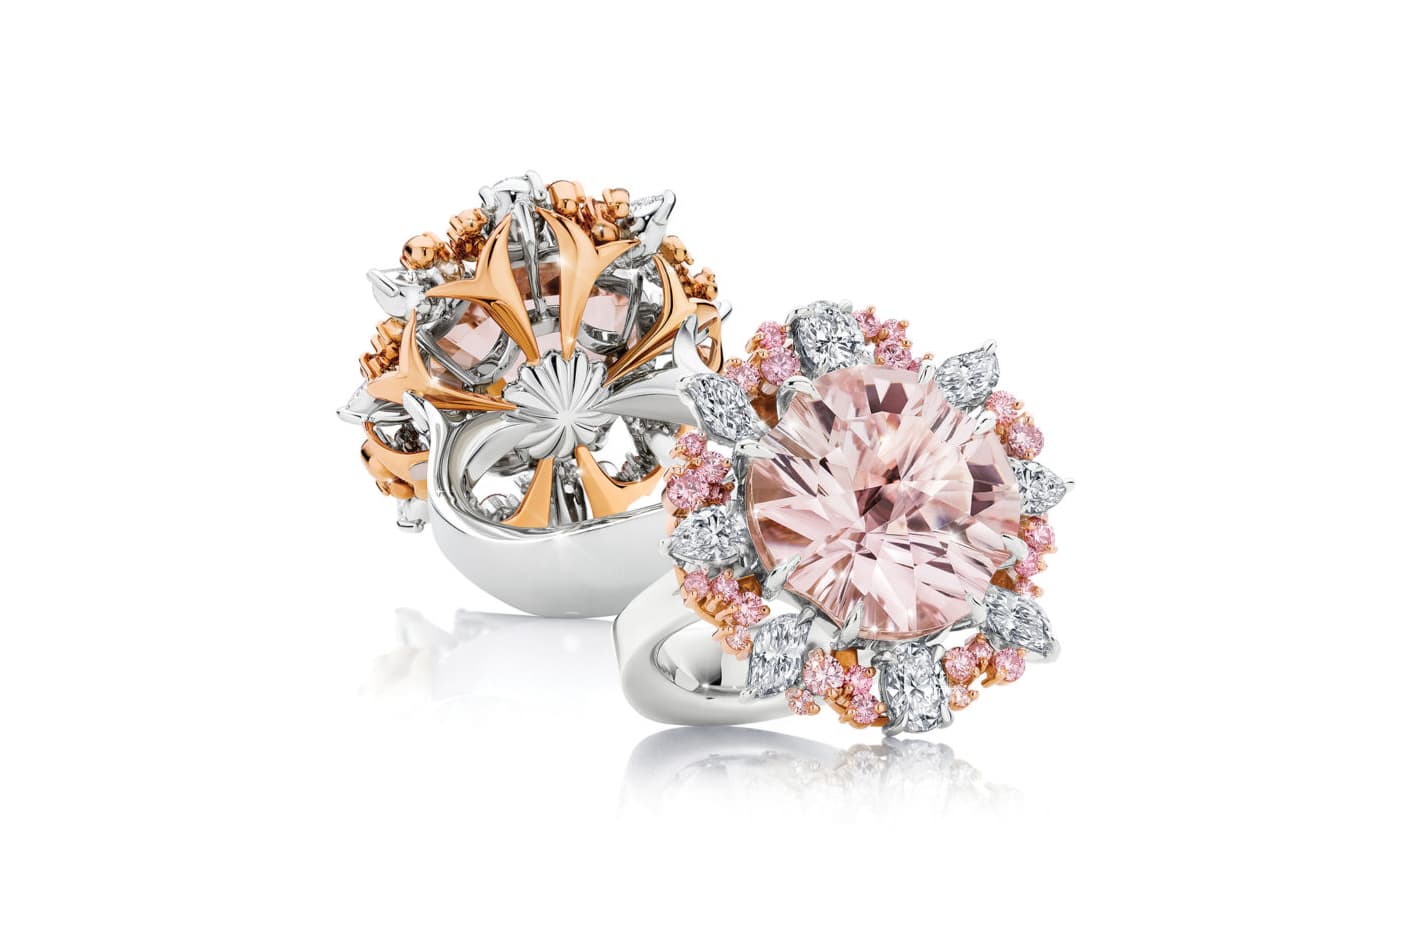 Calleija Aria ring with 9.54ct central Astar cut morganite, Argyle pink diamonds and colourless diamonds in white and rose gold